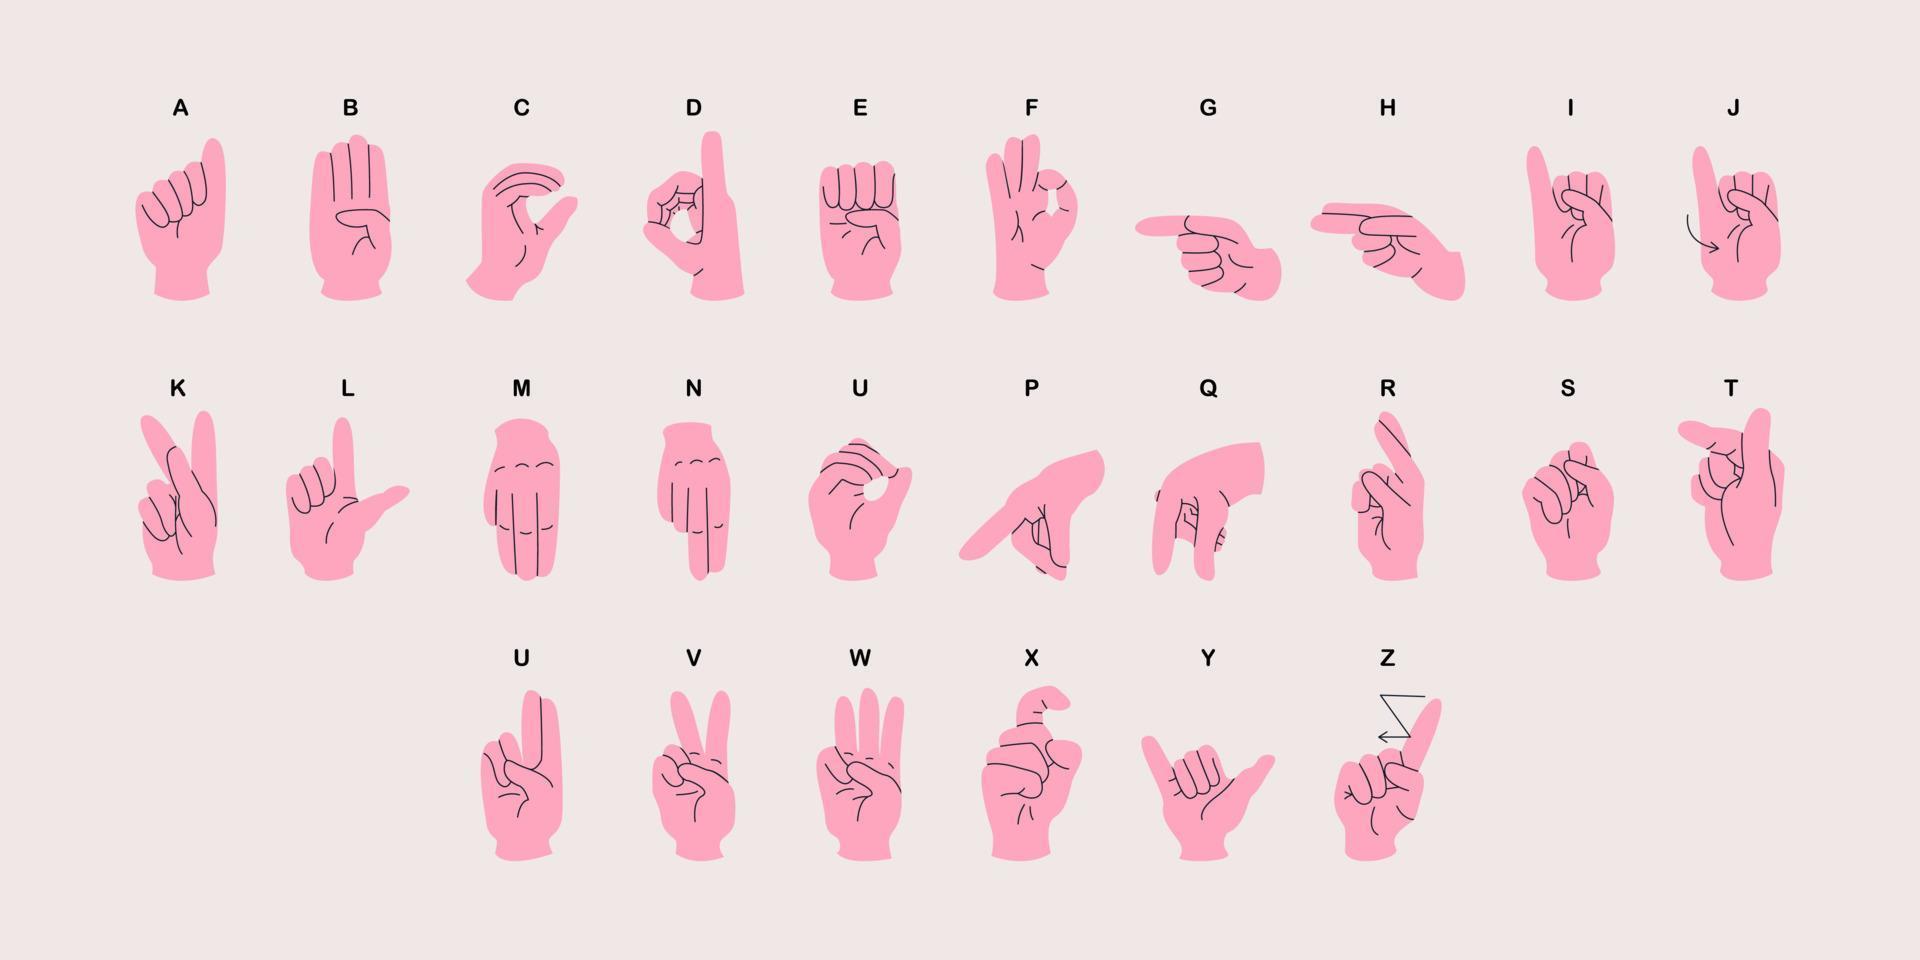 American sign language alphabet horizontal poster with hands. Different colors vector illustration for ASL education poster, card, brochure, canvas, website, books